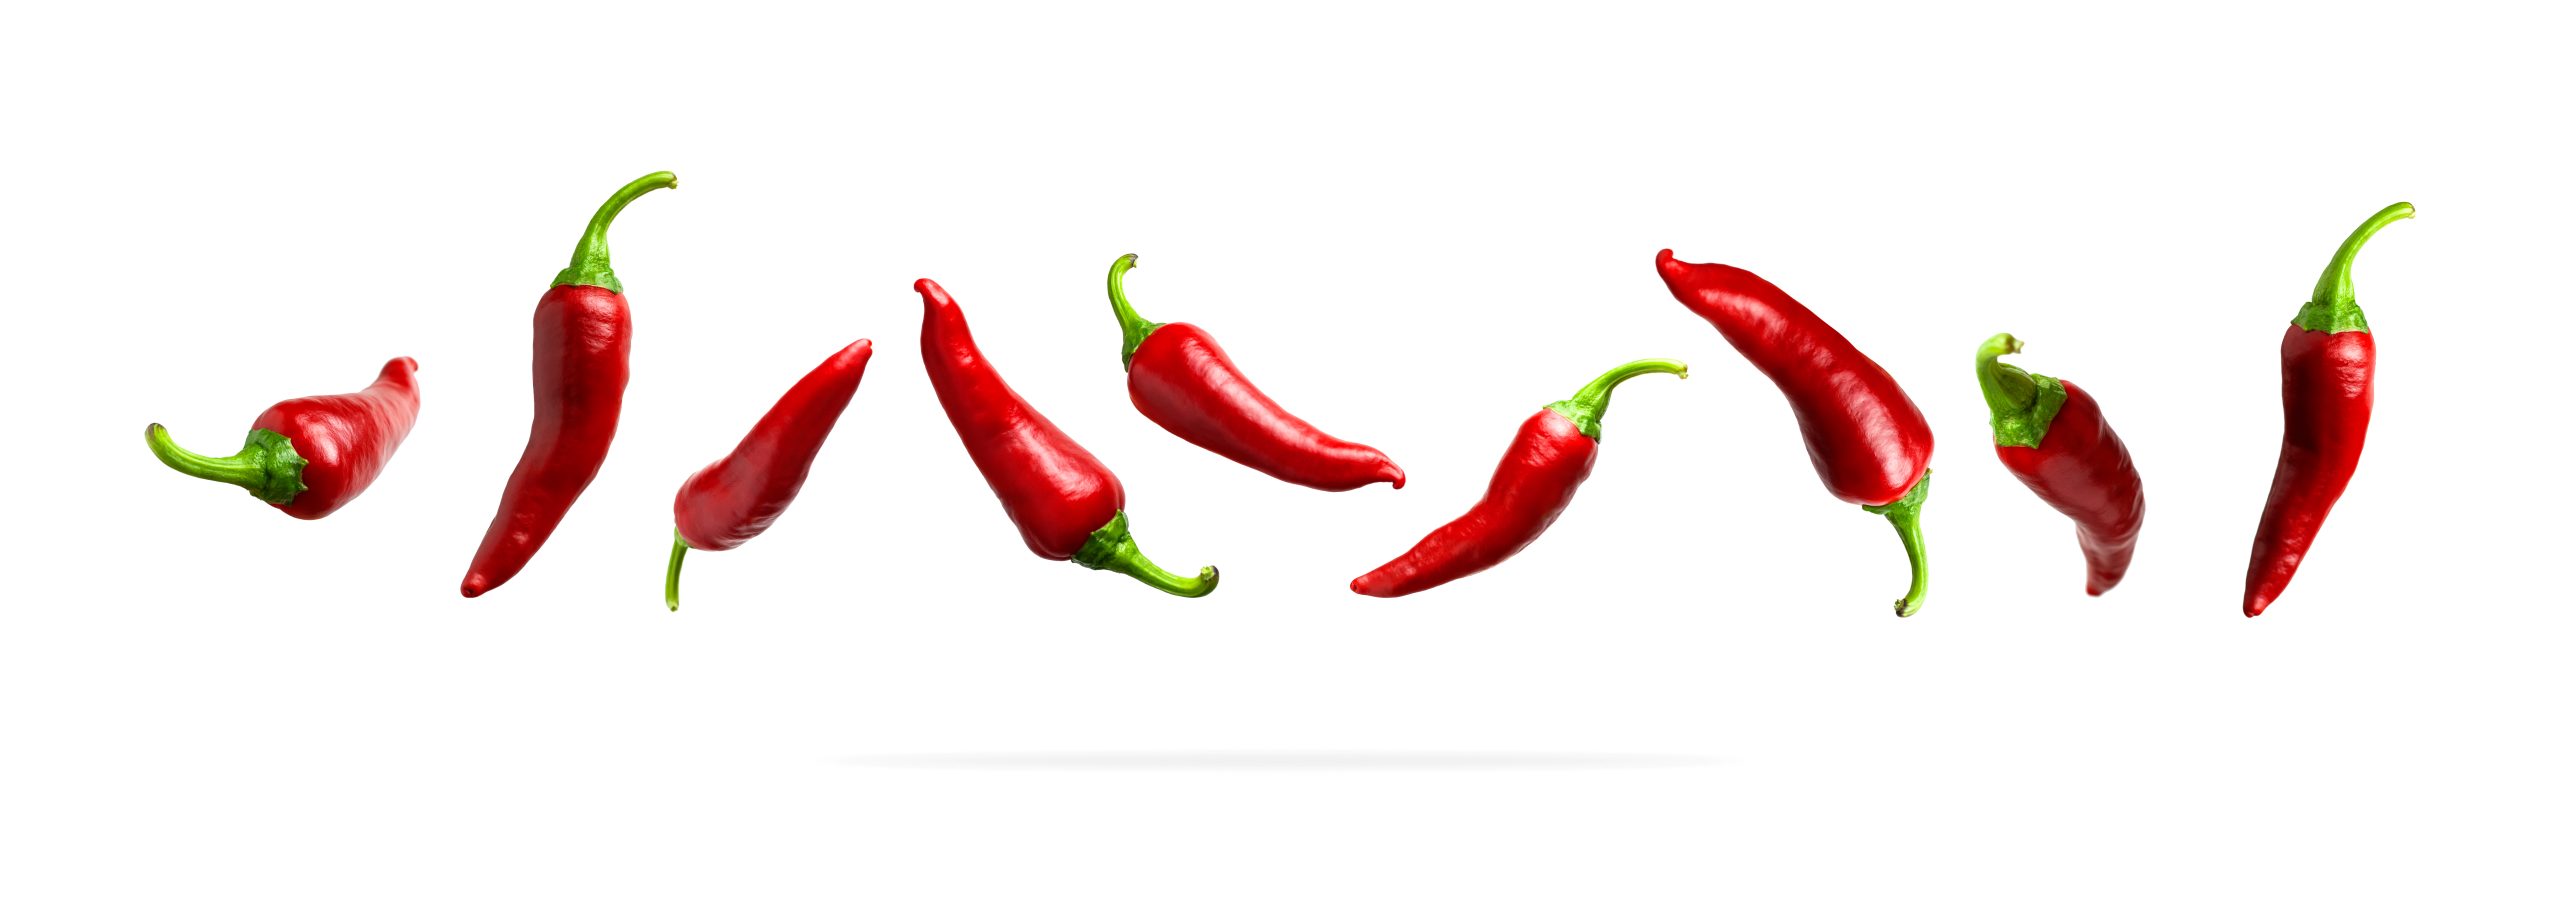 Red,Fresh,Chili,Pepper,Isolated,On,White,Background.,Seasoning,For